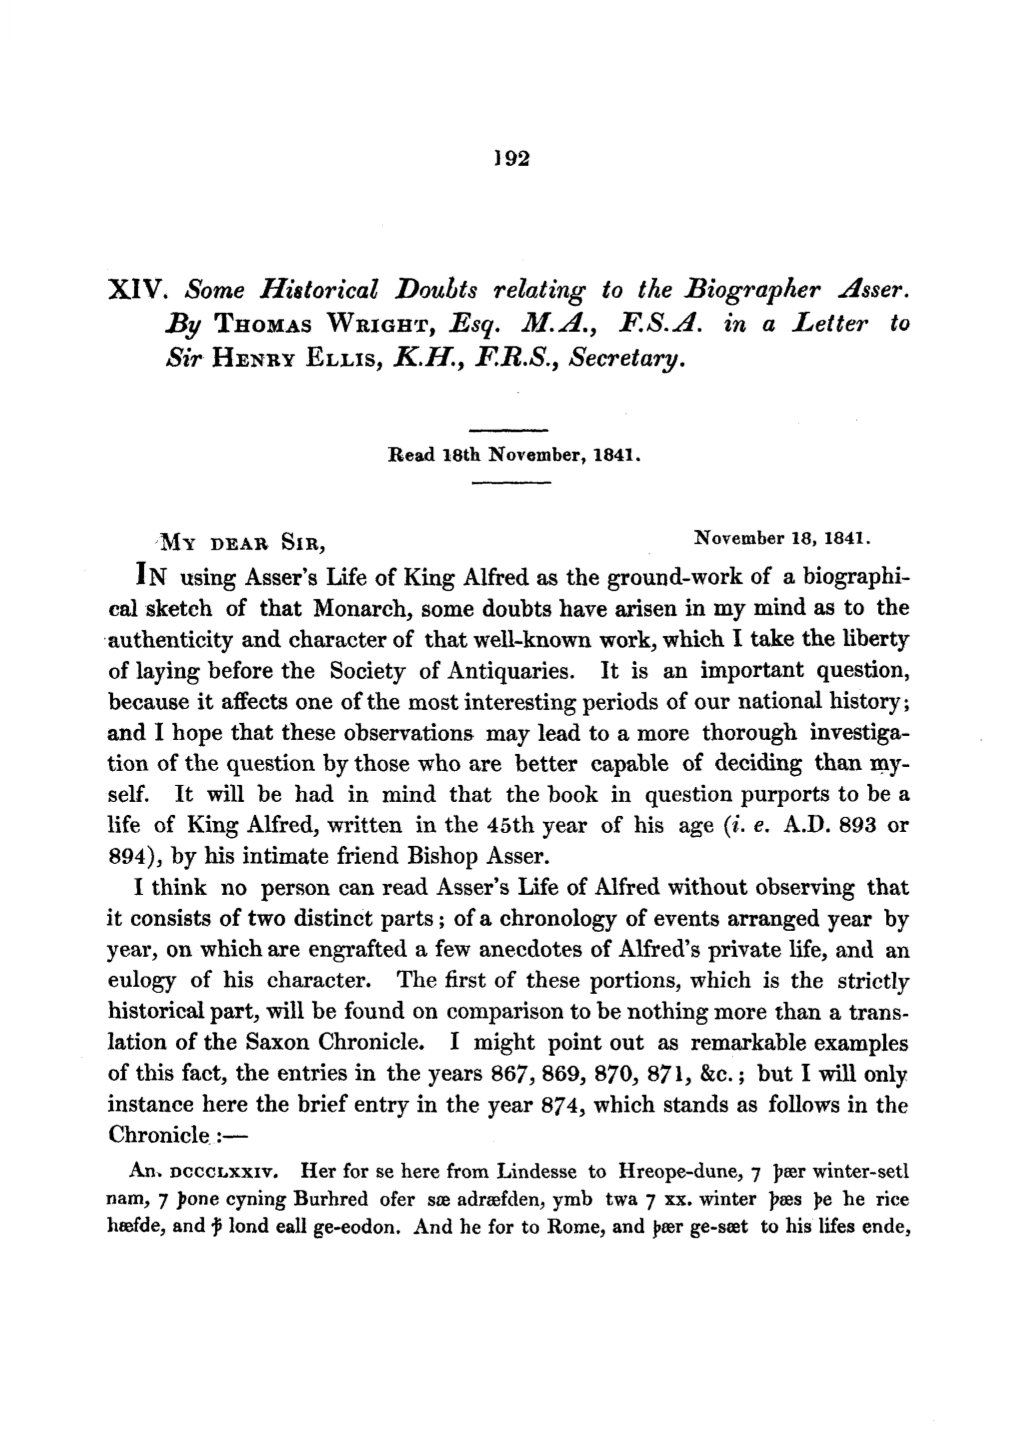 XIV. Some Historical Doubts Relating to the Biographer Asser. By